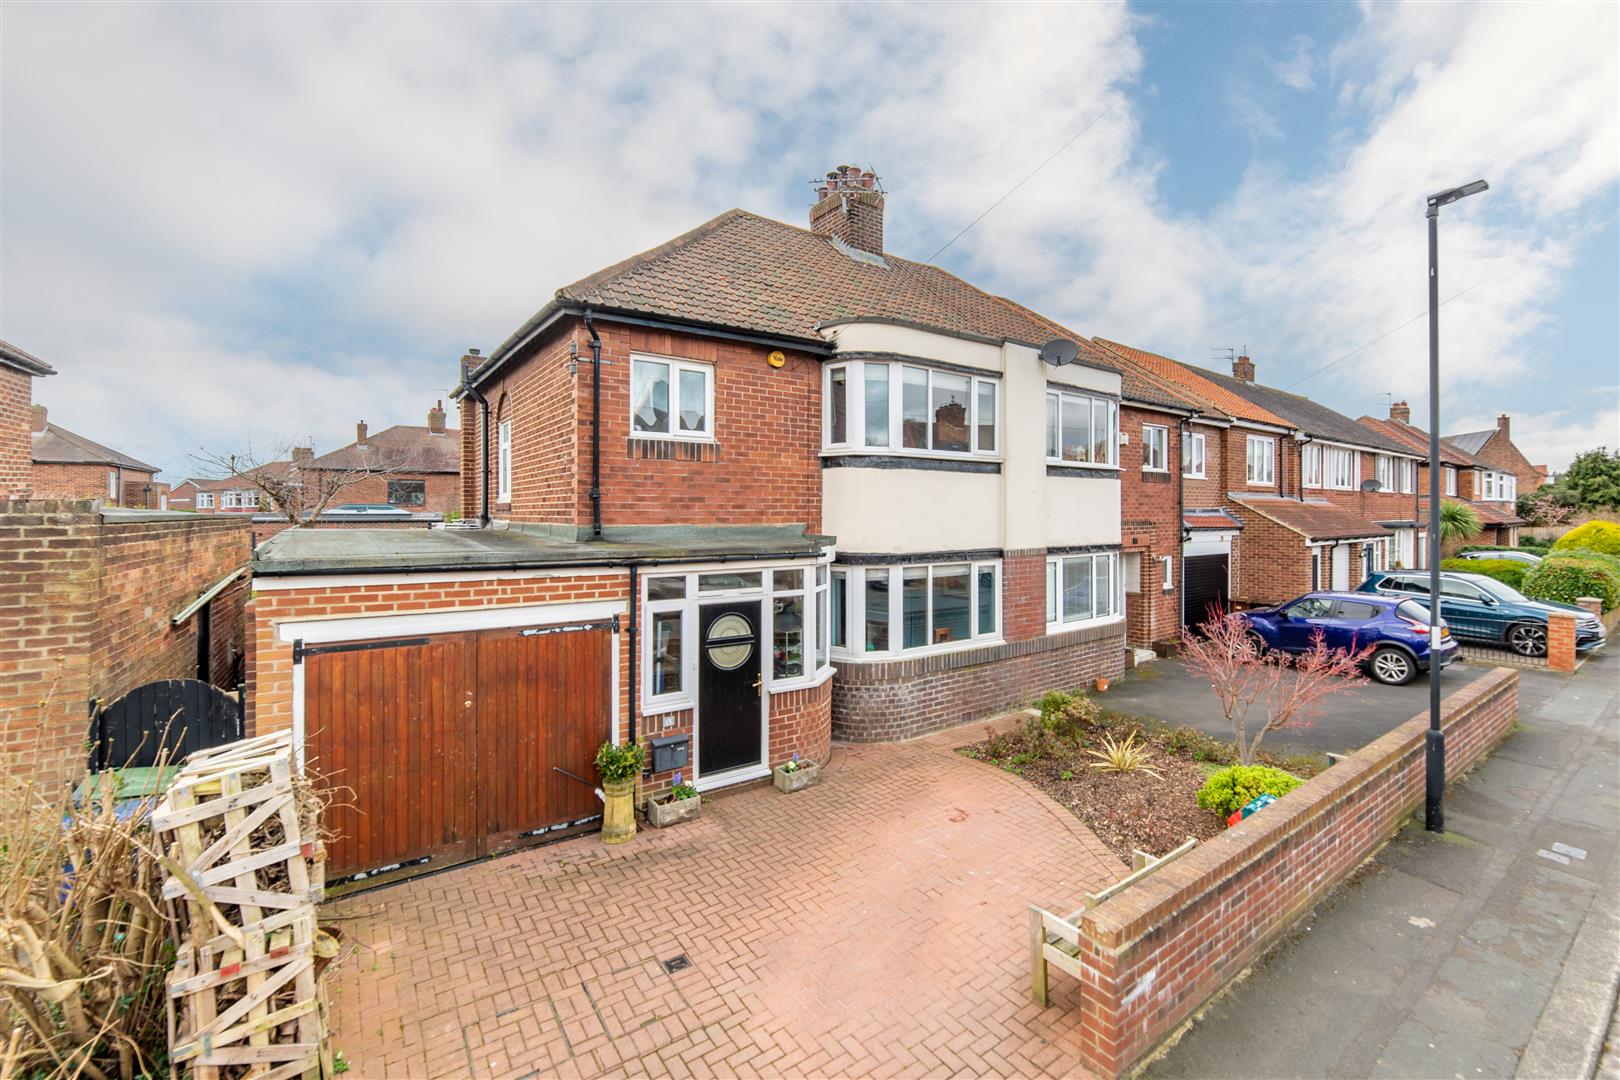 3 bed semi-detached house for sale in Polwarth Road, Newcastle Upon Tyne, NE3 